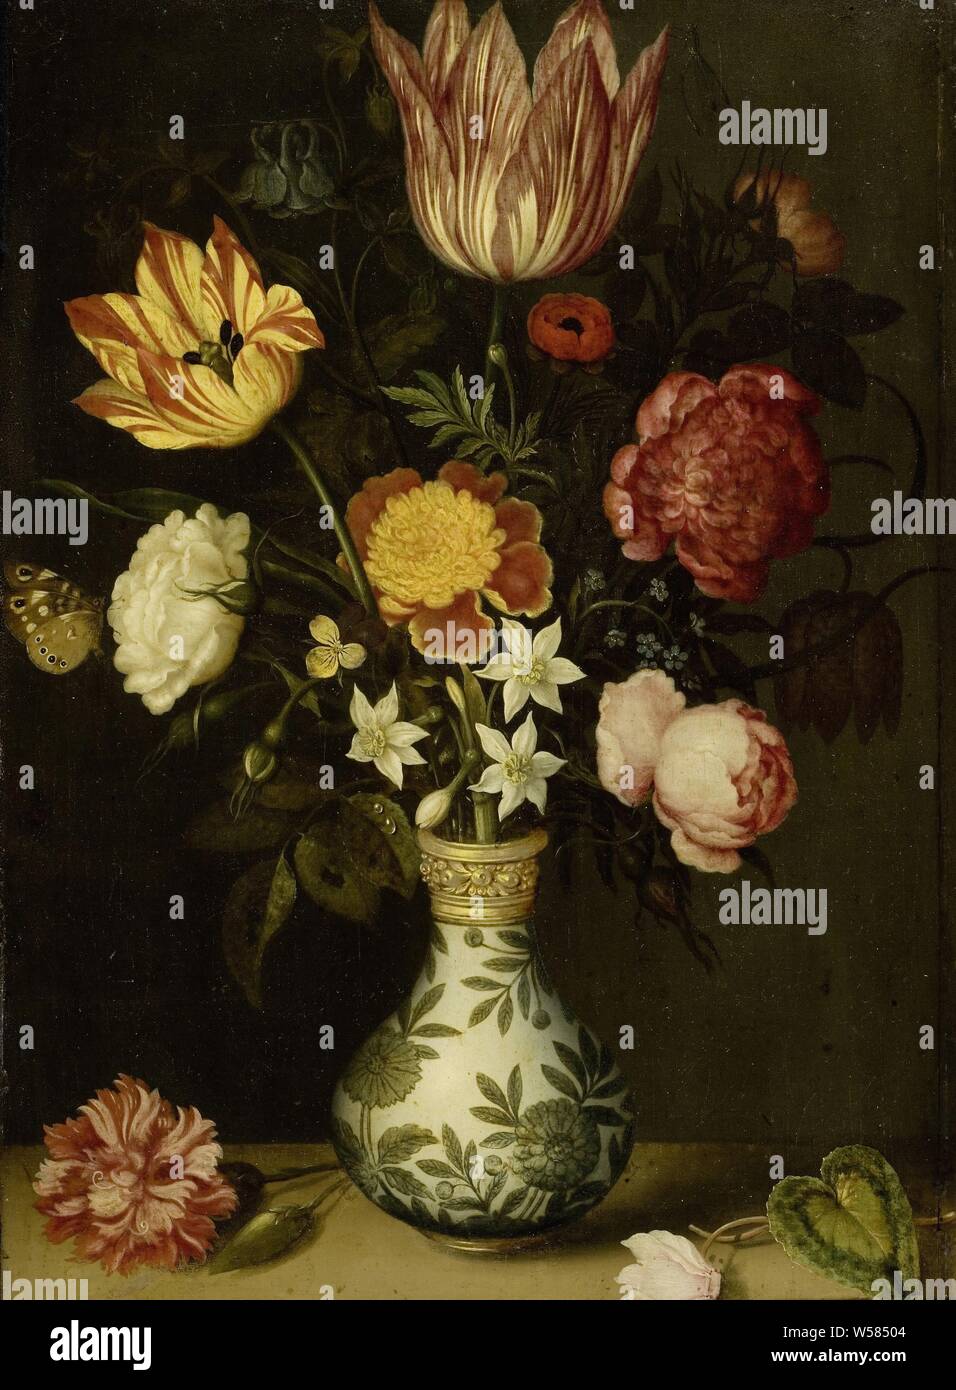 Still Life with Flowers in a Wan Li Vase, Still life with flowers in a Wan Li vase. Bouquet with tulips, roses and daffodils in a vase. On the stone plinth a carnation and a cyclamen, flowers in a vase, flowers: rose, flowers: tulip, flowers: narcissus, flowers: carnation, container or ceramics: jar, jug, pot, vase, Ambrosius Bosschaert, 1619, copper (metal), oil paint (paint), support: h 31 cm × w 22.5 cm Stock Photo